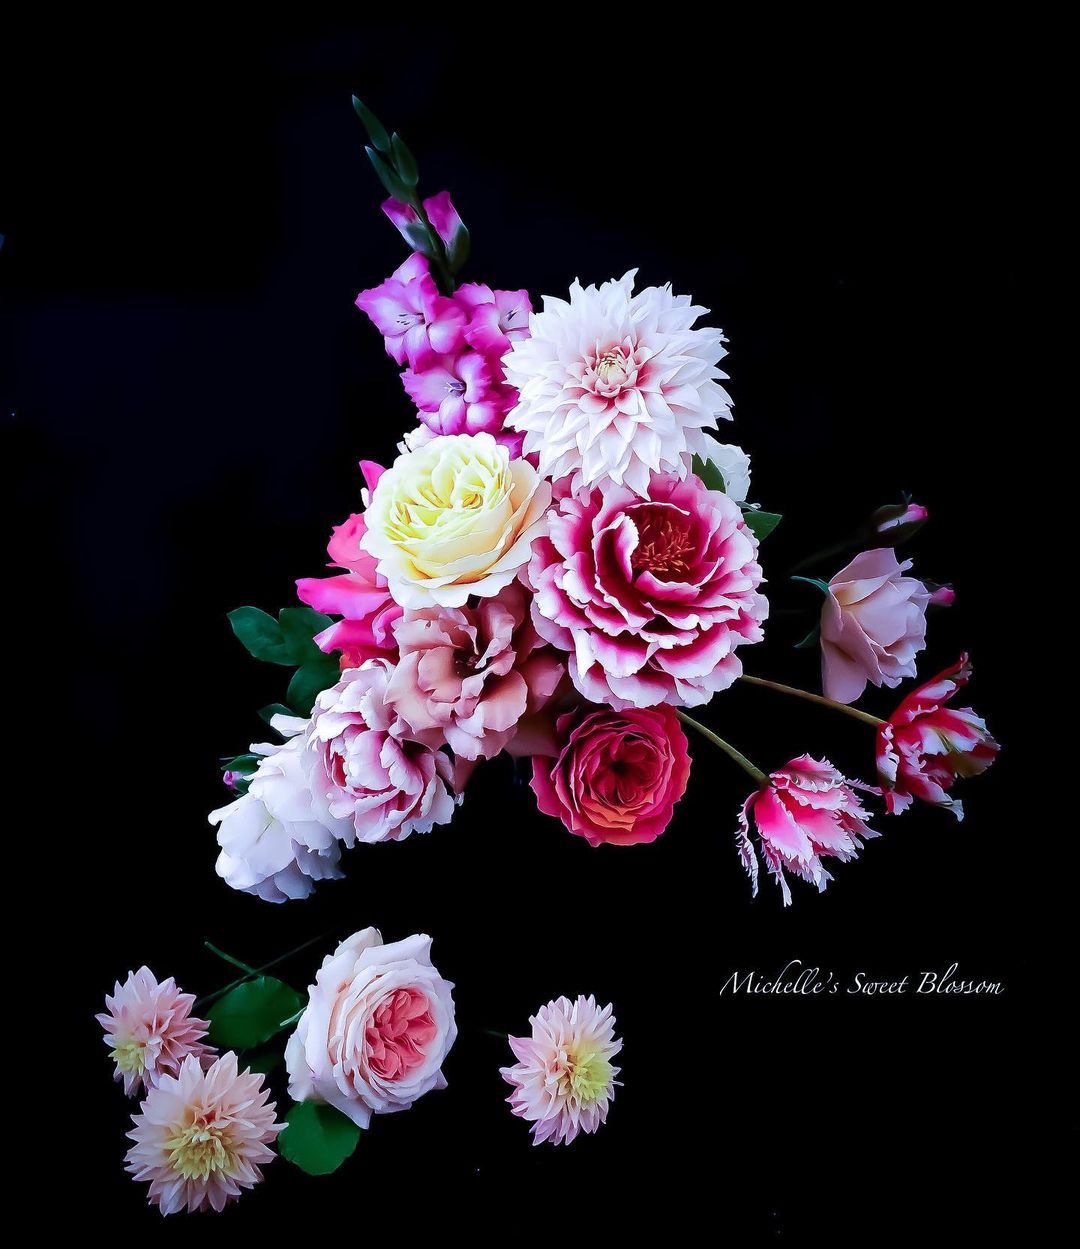 Ultra Realistic Sugar Flowers That You Can Hardly Distinguish From the Real Thing by Michelle Nguyen on Thursd